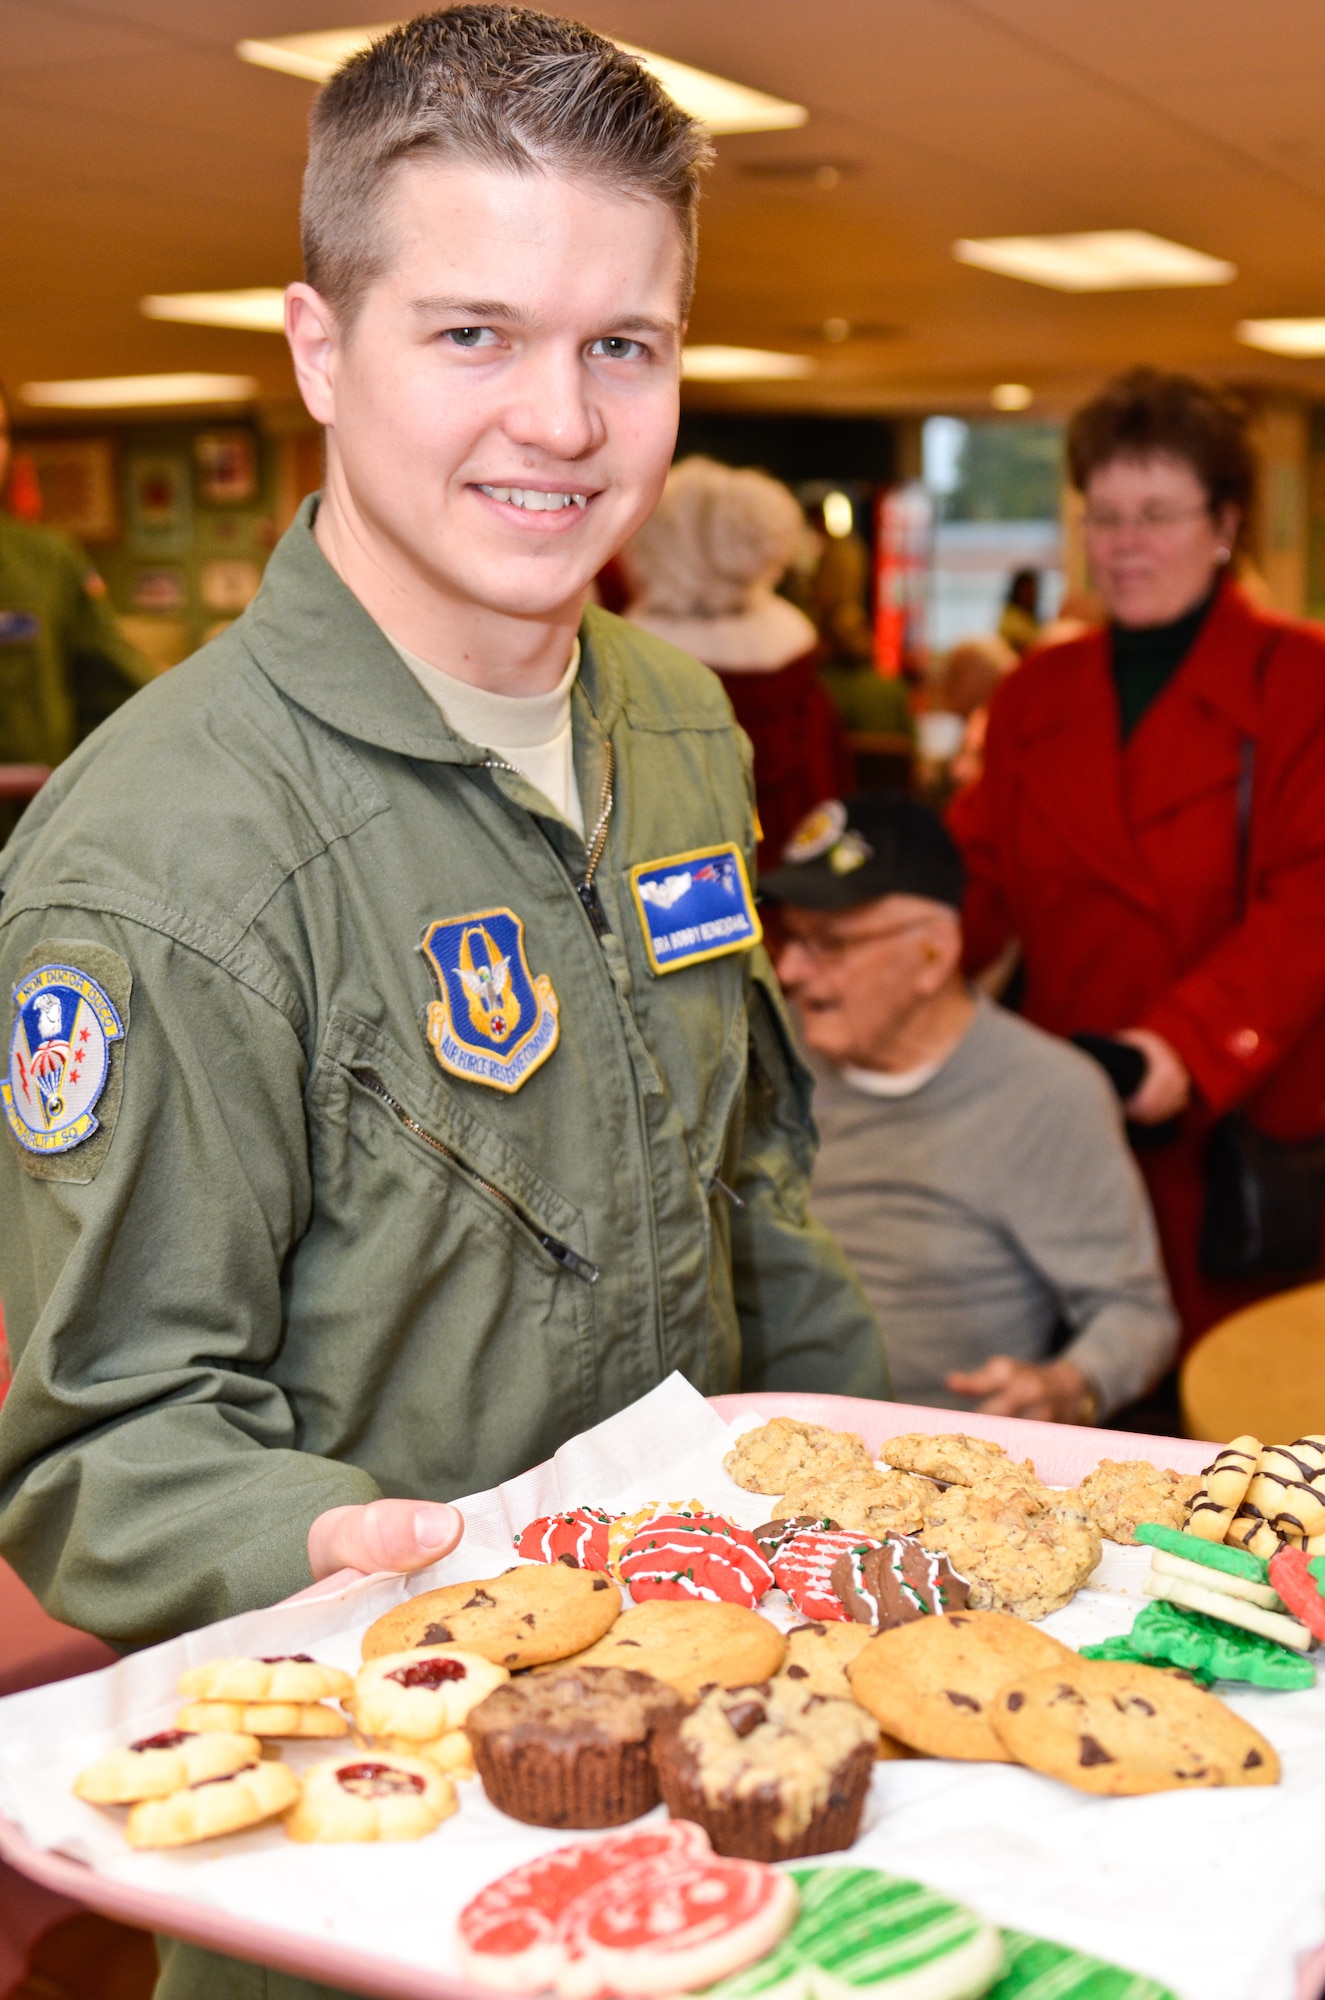 Airmen from the 337th Airlift Squadron, Westover Air Reserve Base, bring
cookies and holiday cheer to veterans at the Holyoke Soldiers' Home Dec. 15.